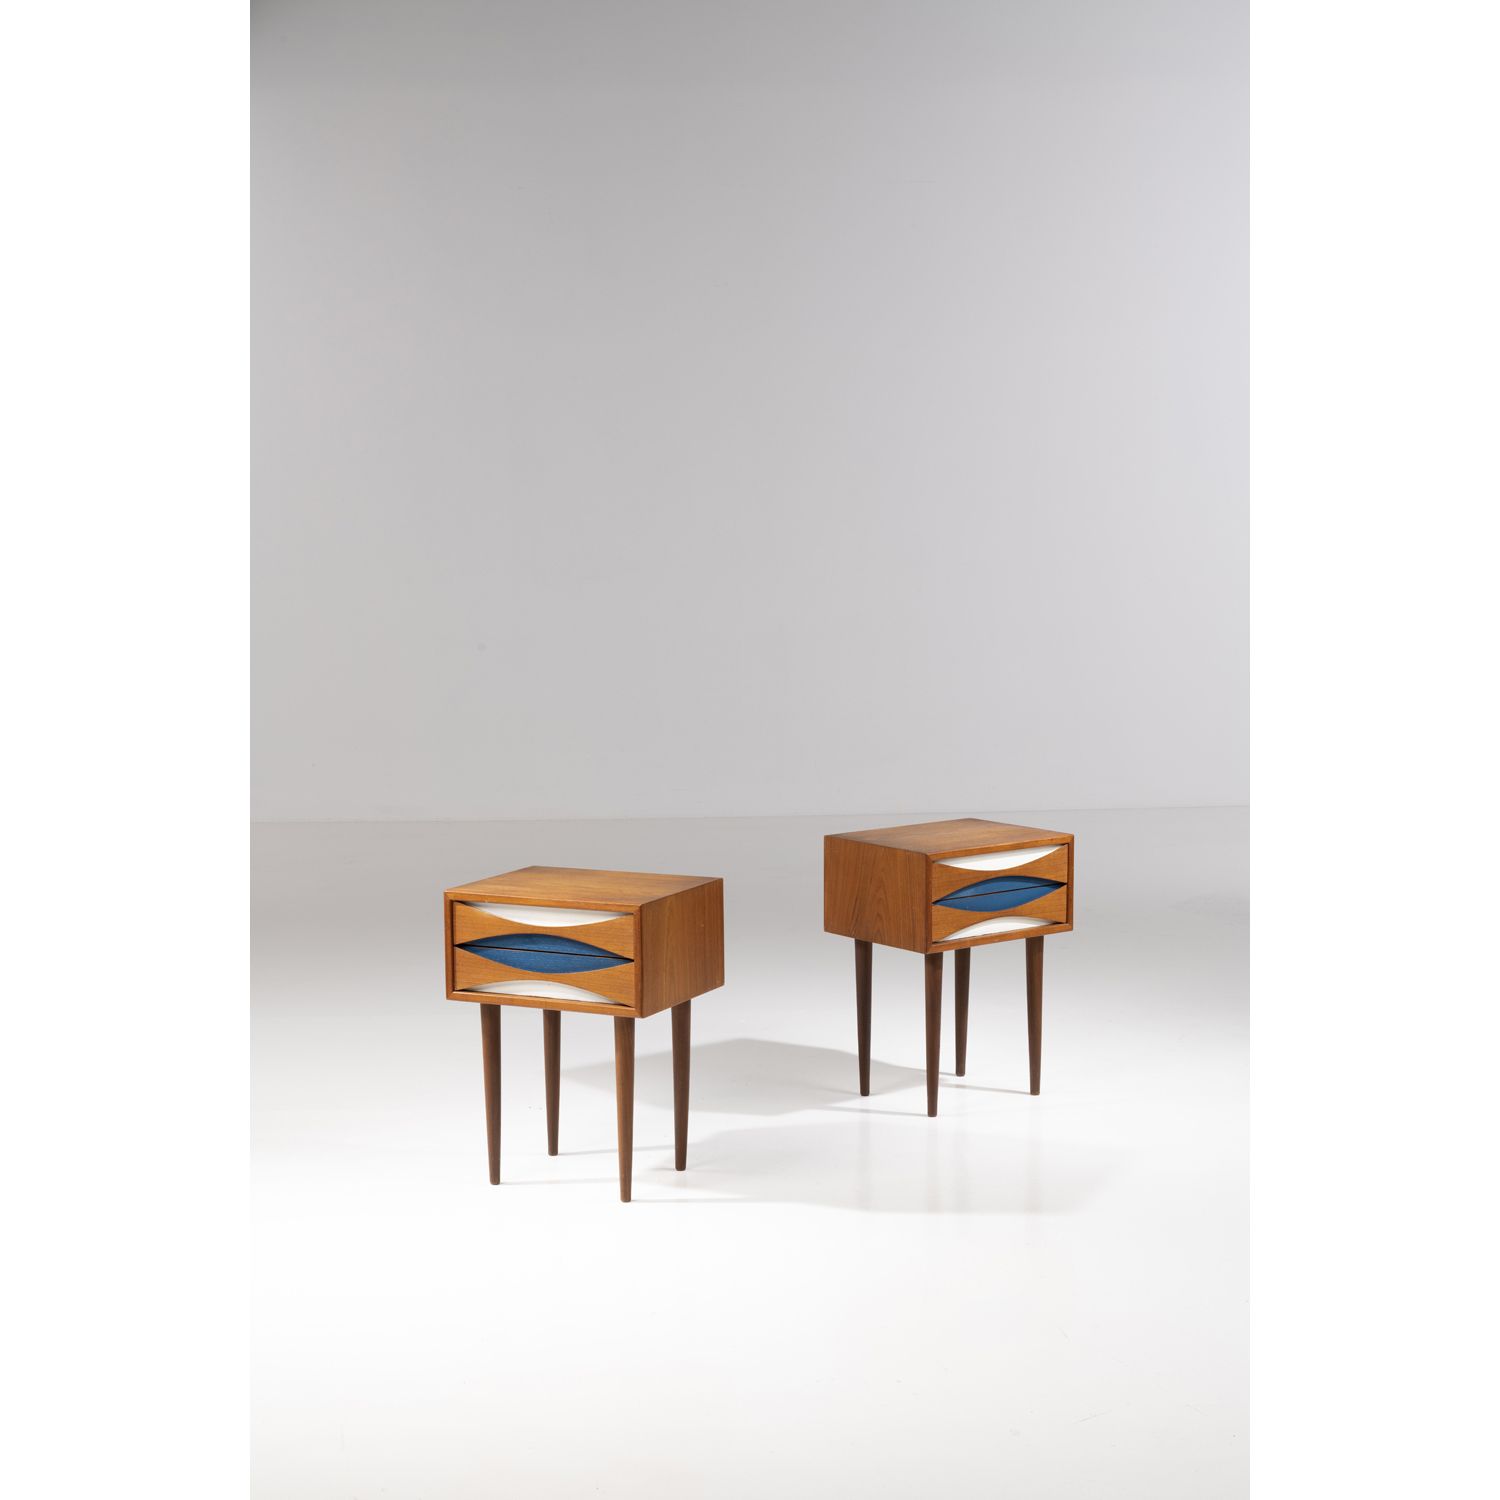 Null Niels Clausen (20th c.)

Pair of side tables

Teak and lacquered wood

Edit&hellip;